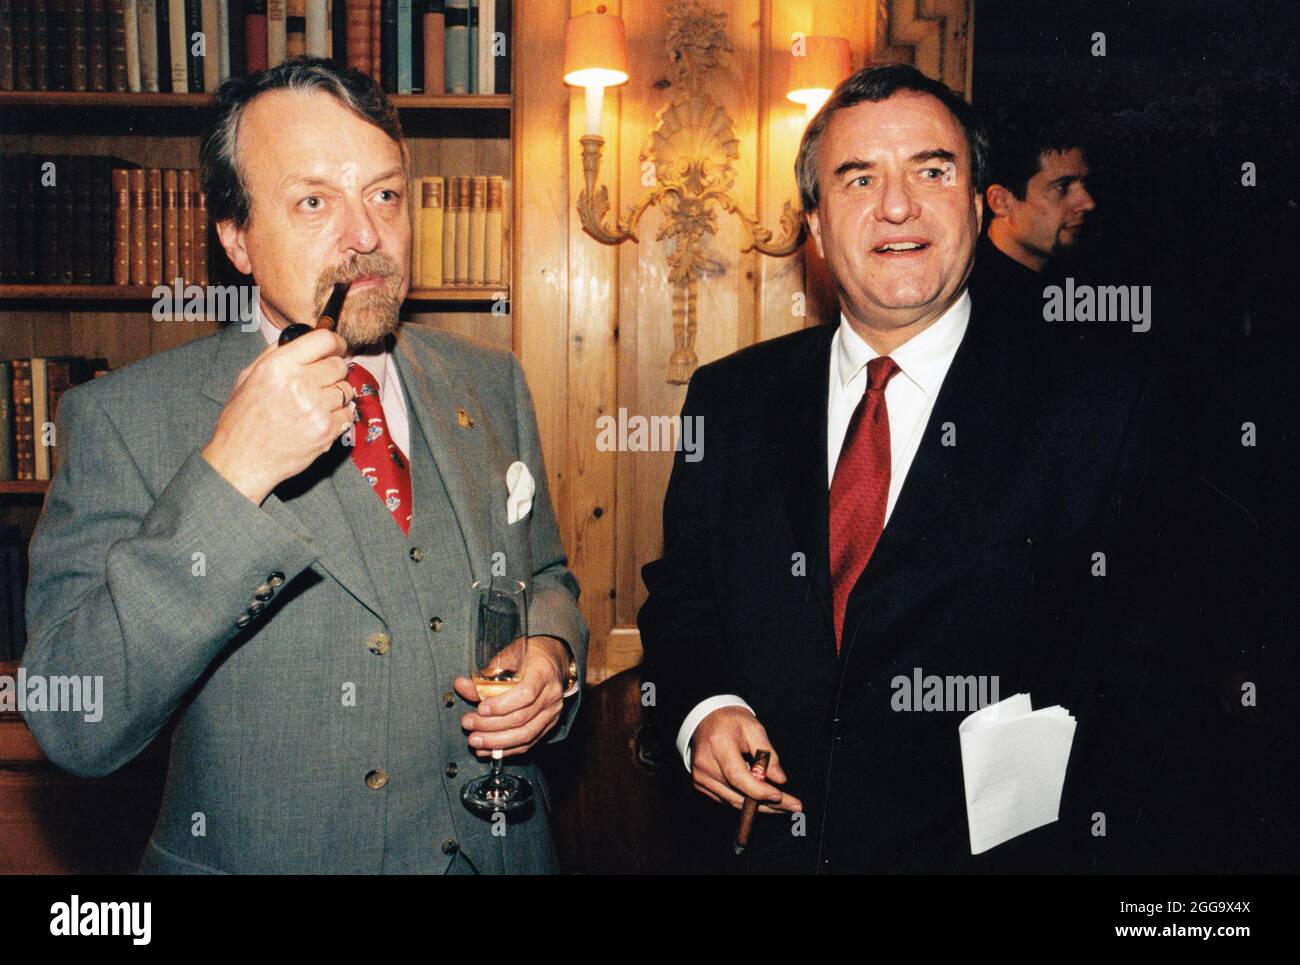 01 January 1998, Berlin: Claus Larass (r), Member of the Executive Board Axel Springer Verlag, and Peter Philipps (l), Editor-in-Chief Die Welt. Photo: Soeren Stache/dpa-Zentralbild/ZB Stock Photo